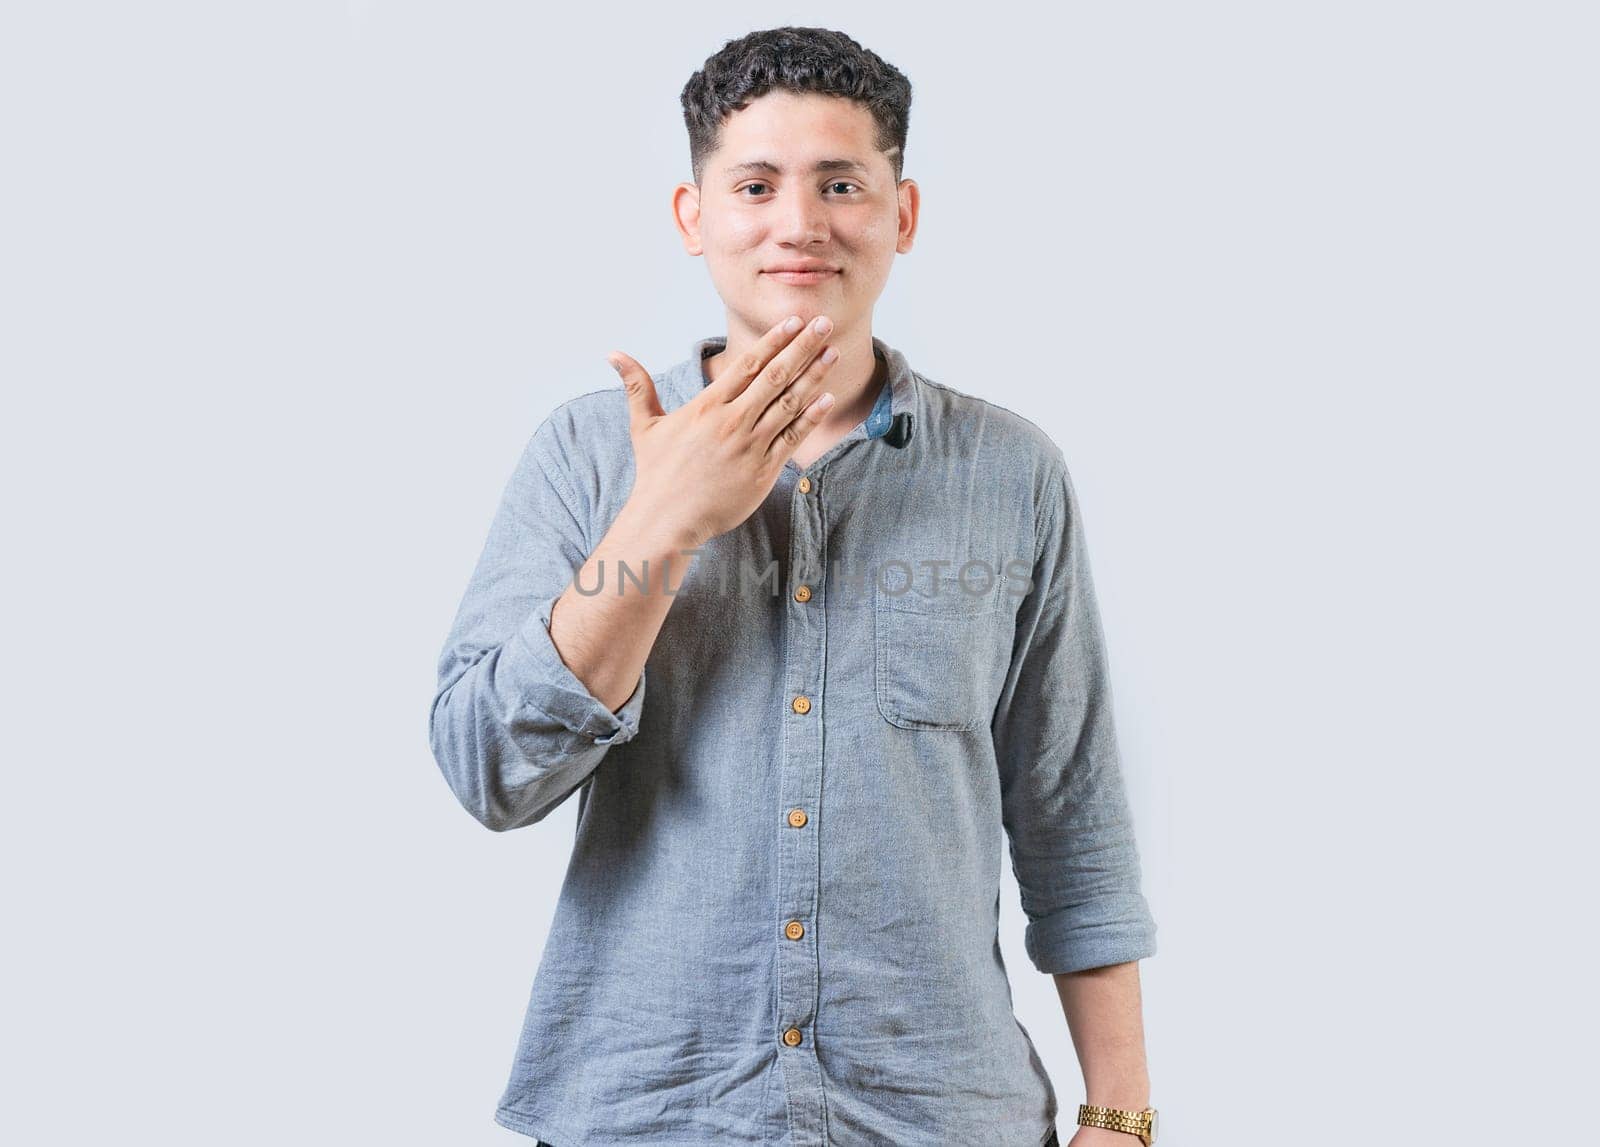 Man making THANK YOU gesture in sign language isolated. People showing THANK YOU gesture in sign language. Non-verbal communication concept by isaiphoto